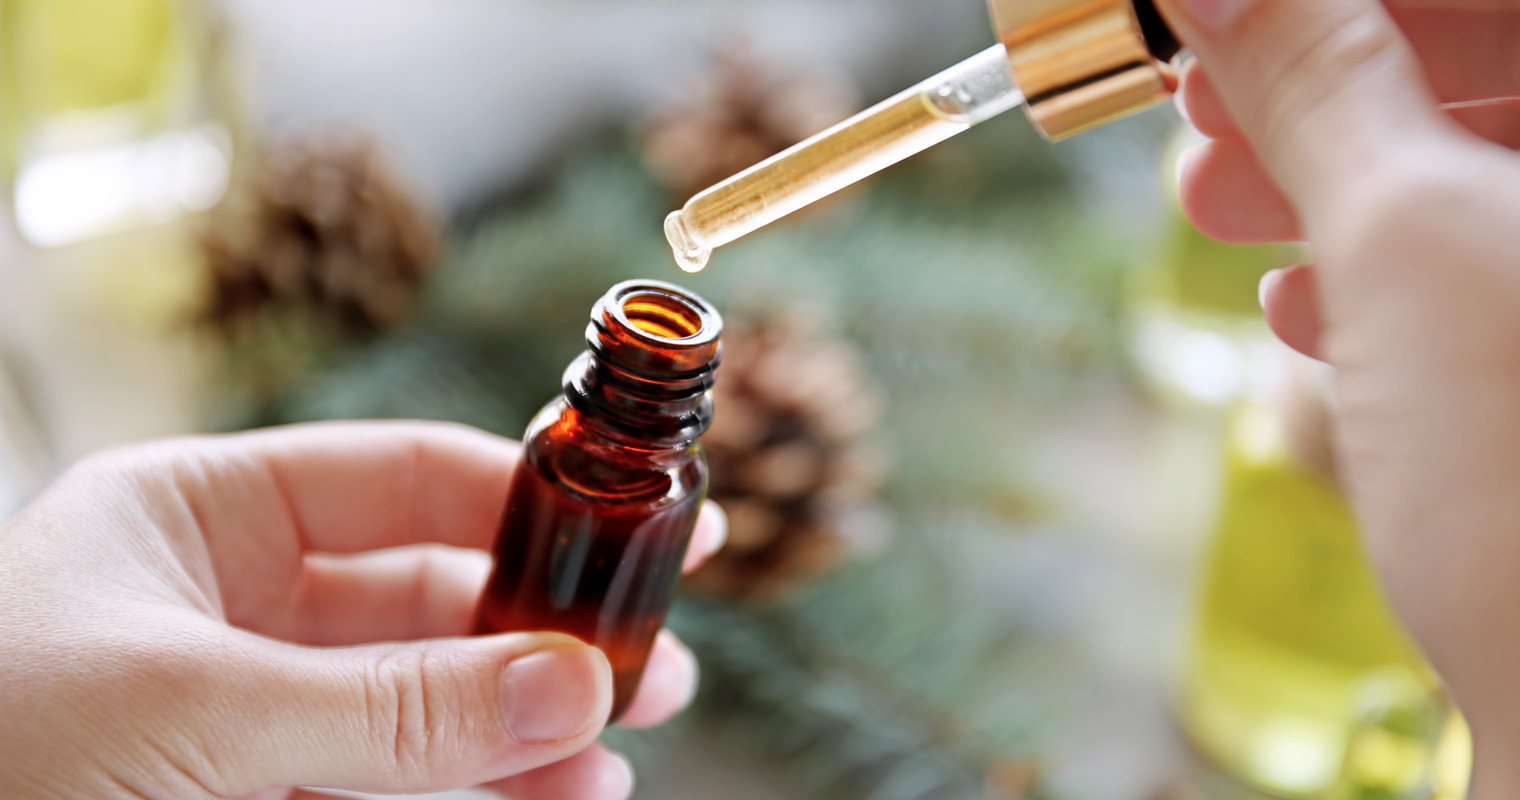 essential oils can be used to repel insects